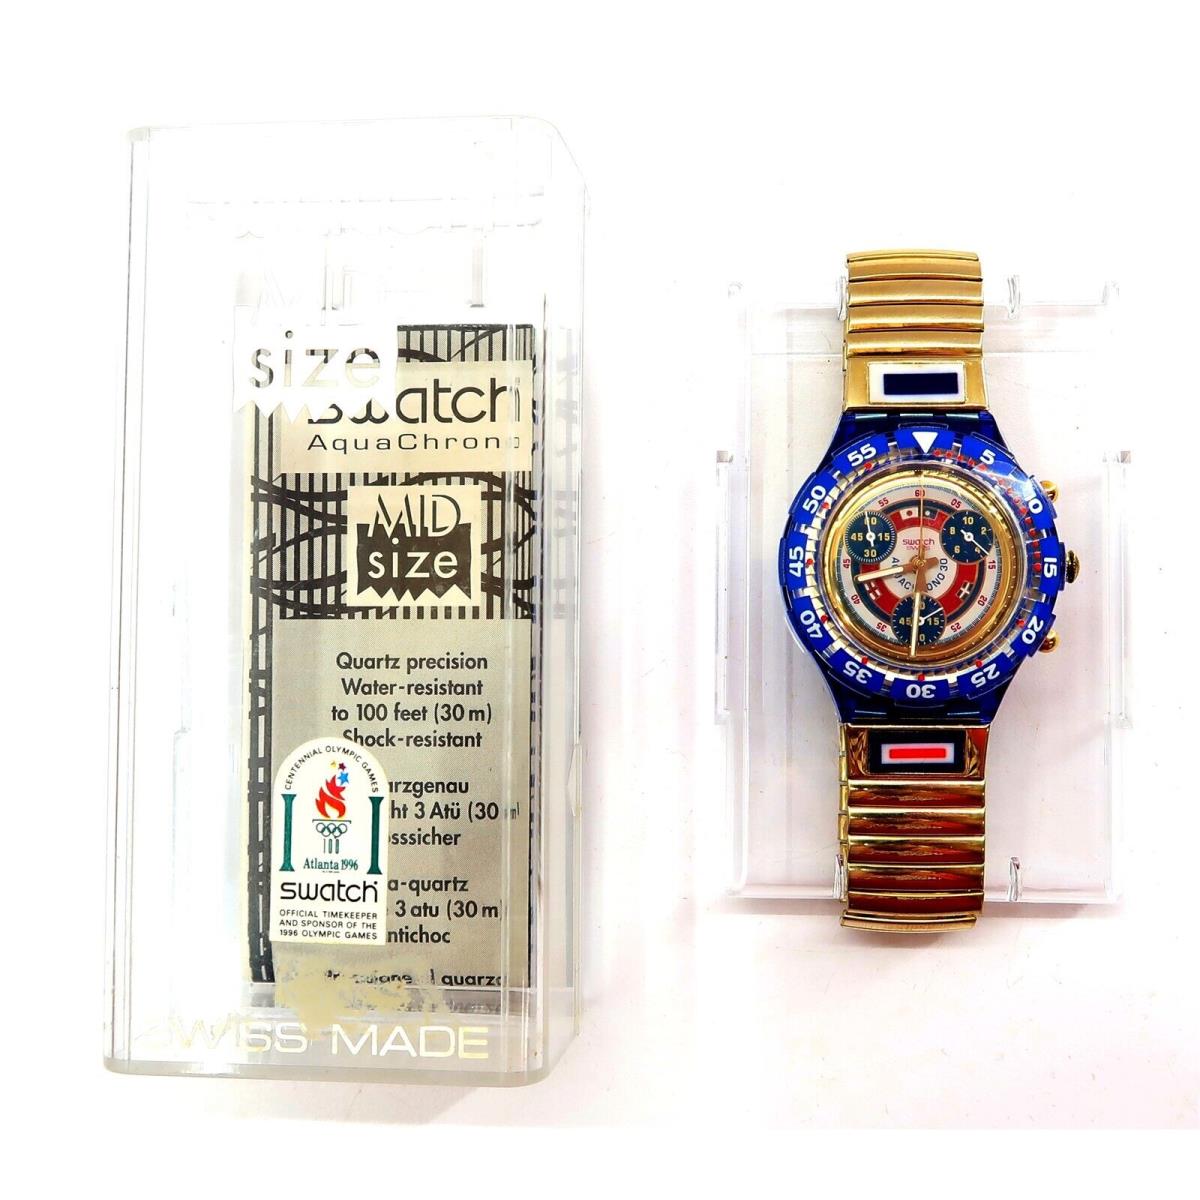 Swatch Aquachrono Watch Commendatore SEN101 Mid Size Case and Papers 1995